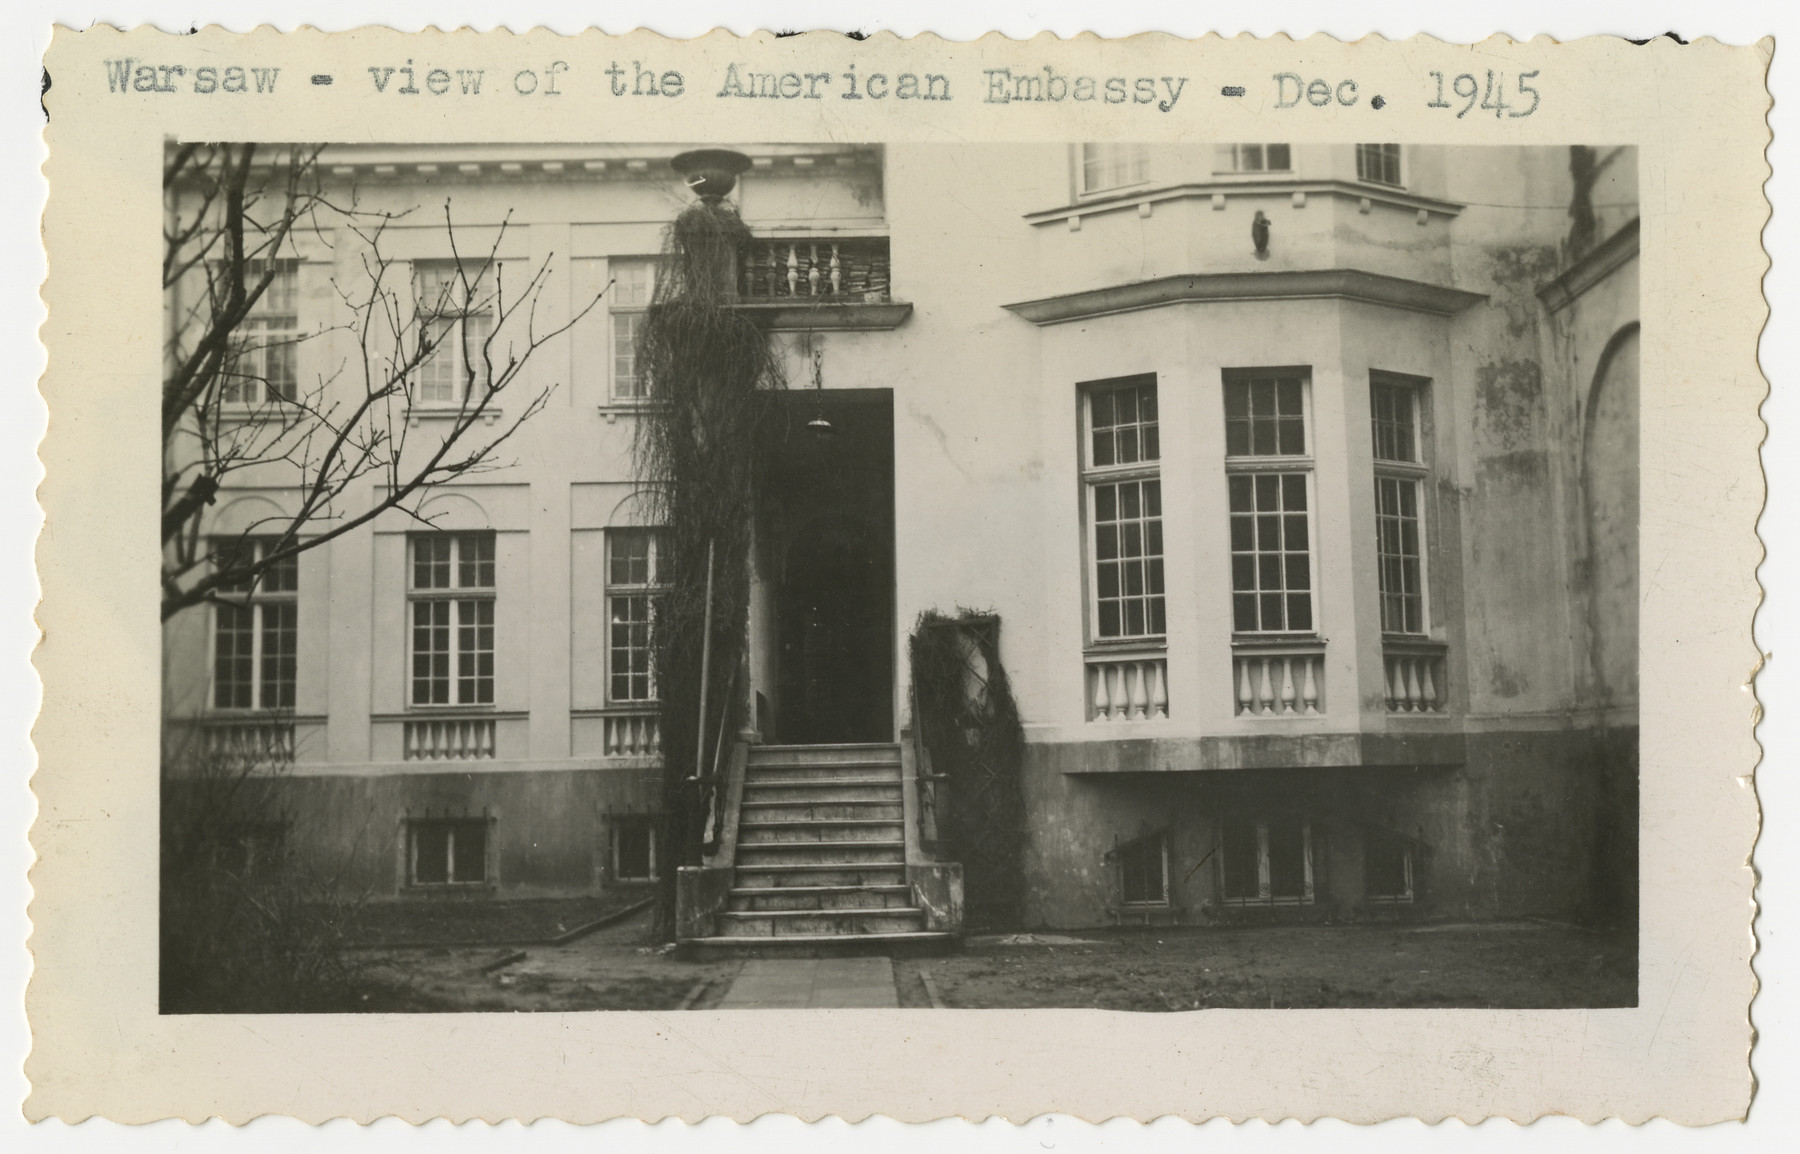 View of the American Embassy in Warsaw.